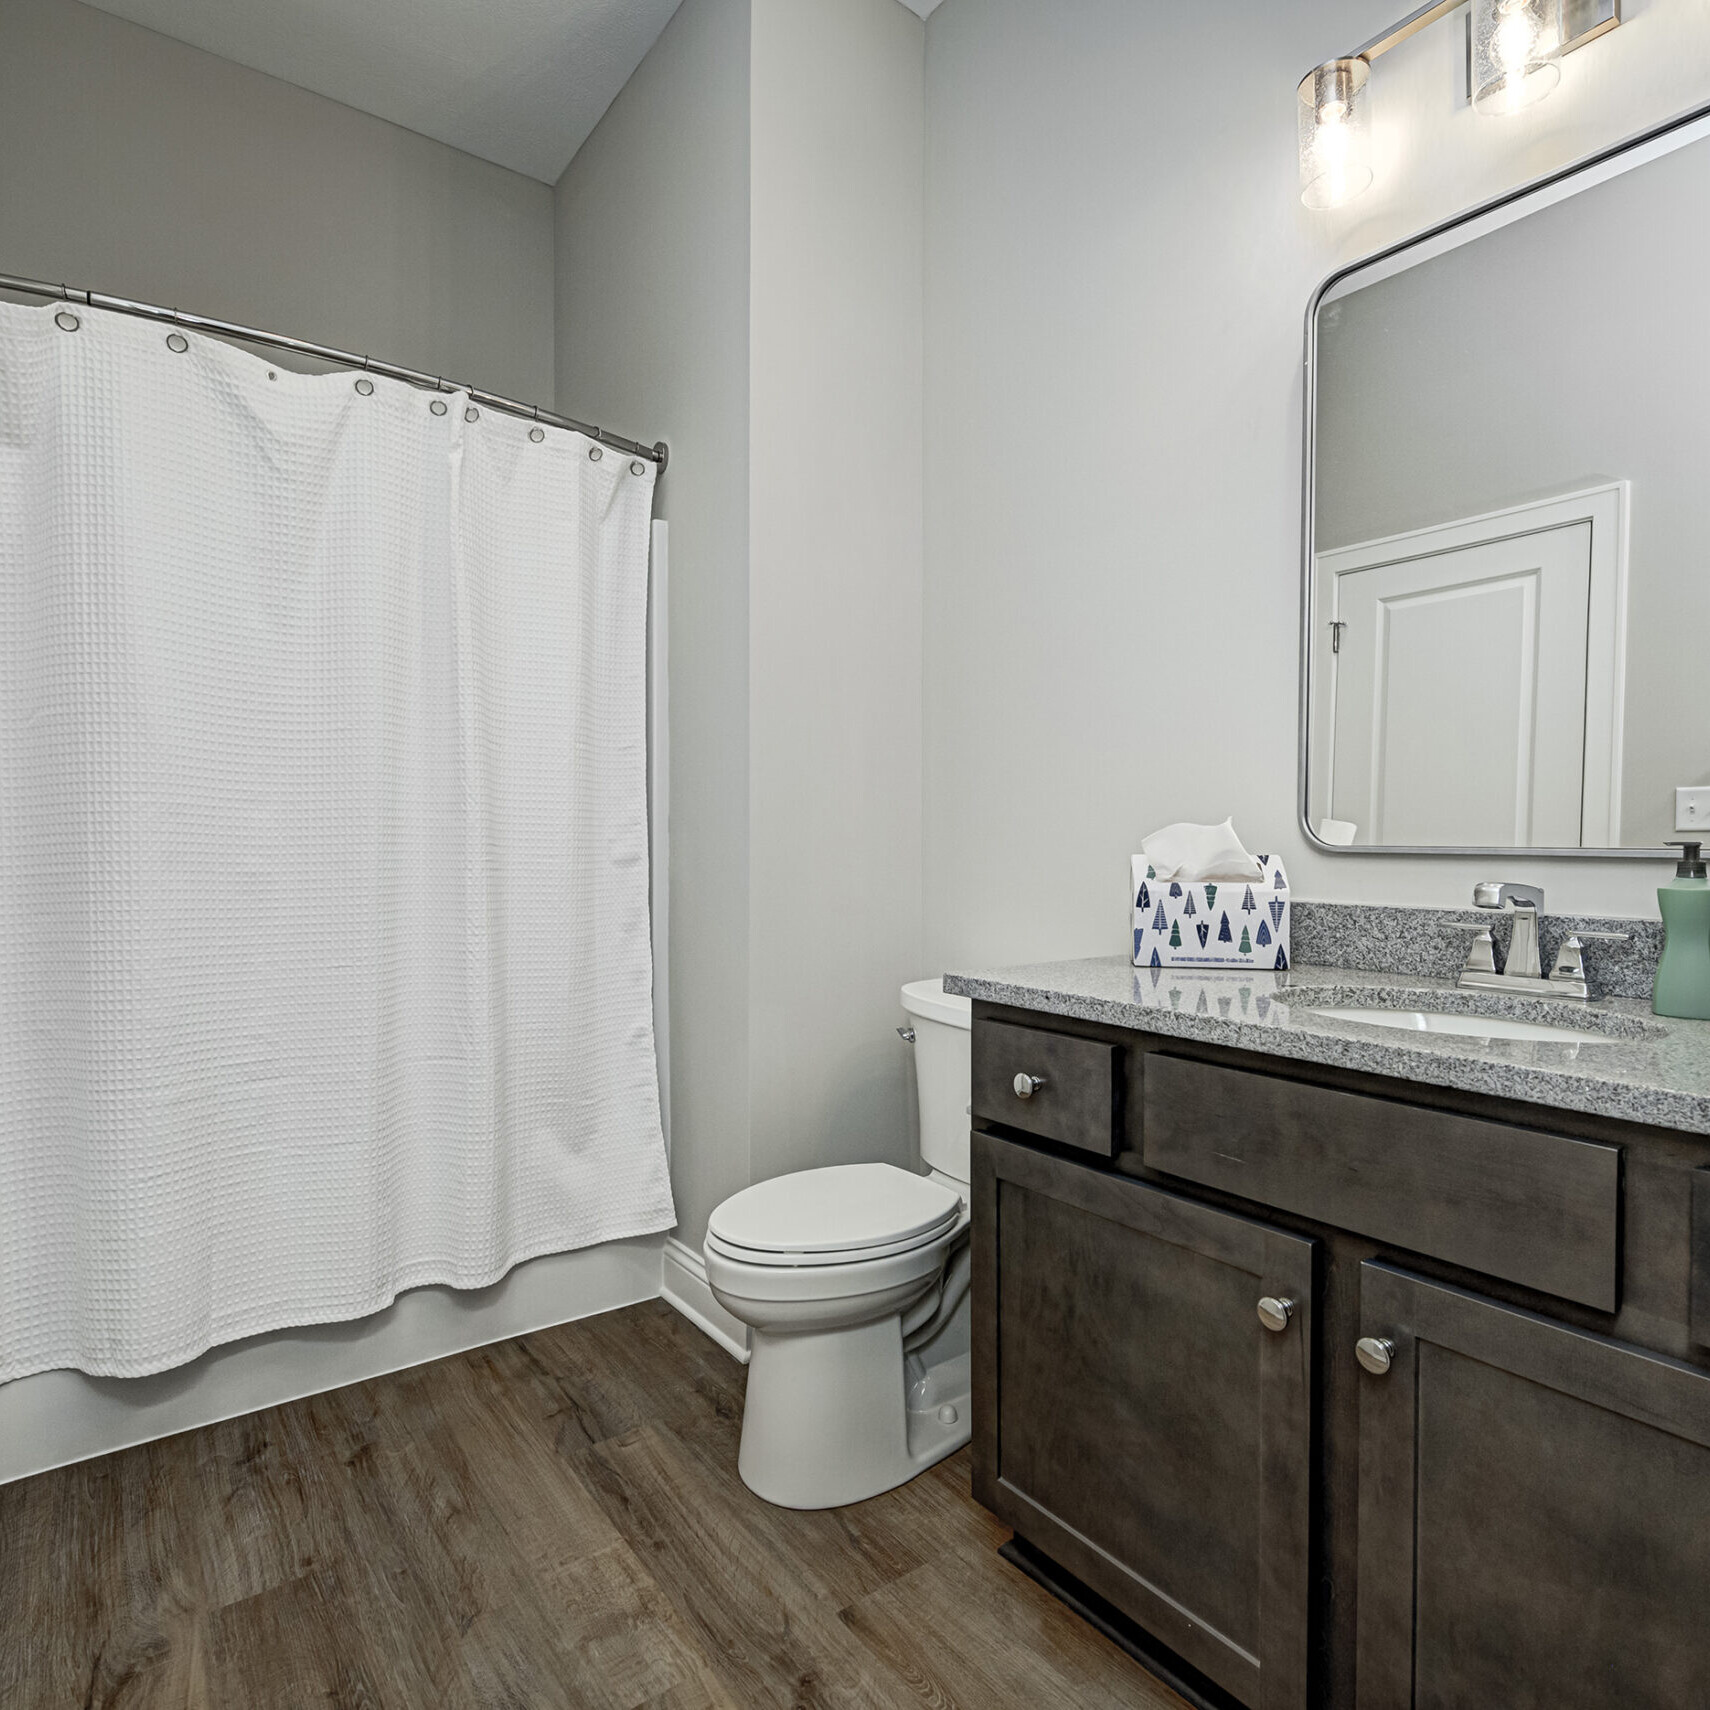 A bathroom with a white shower curtain and wood floors, designed and built by a Custom Home Builder in Carmel Indiana.